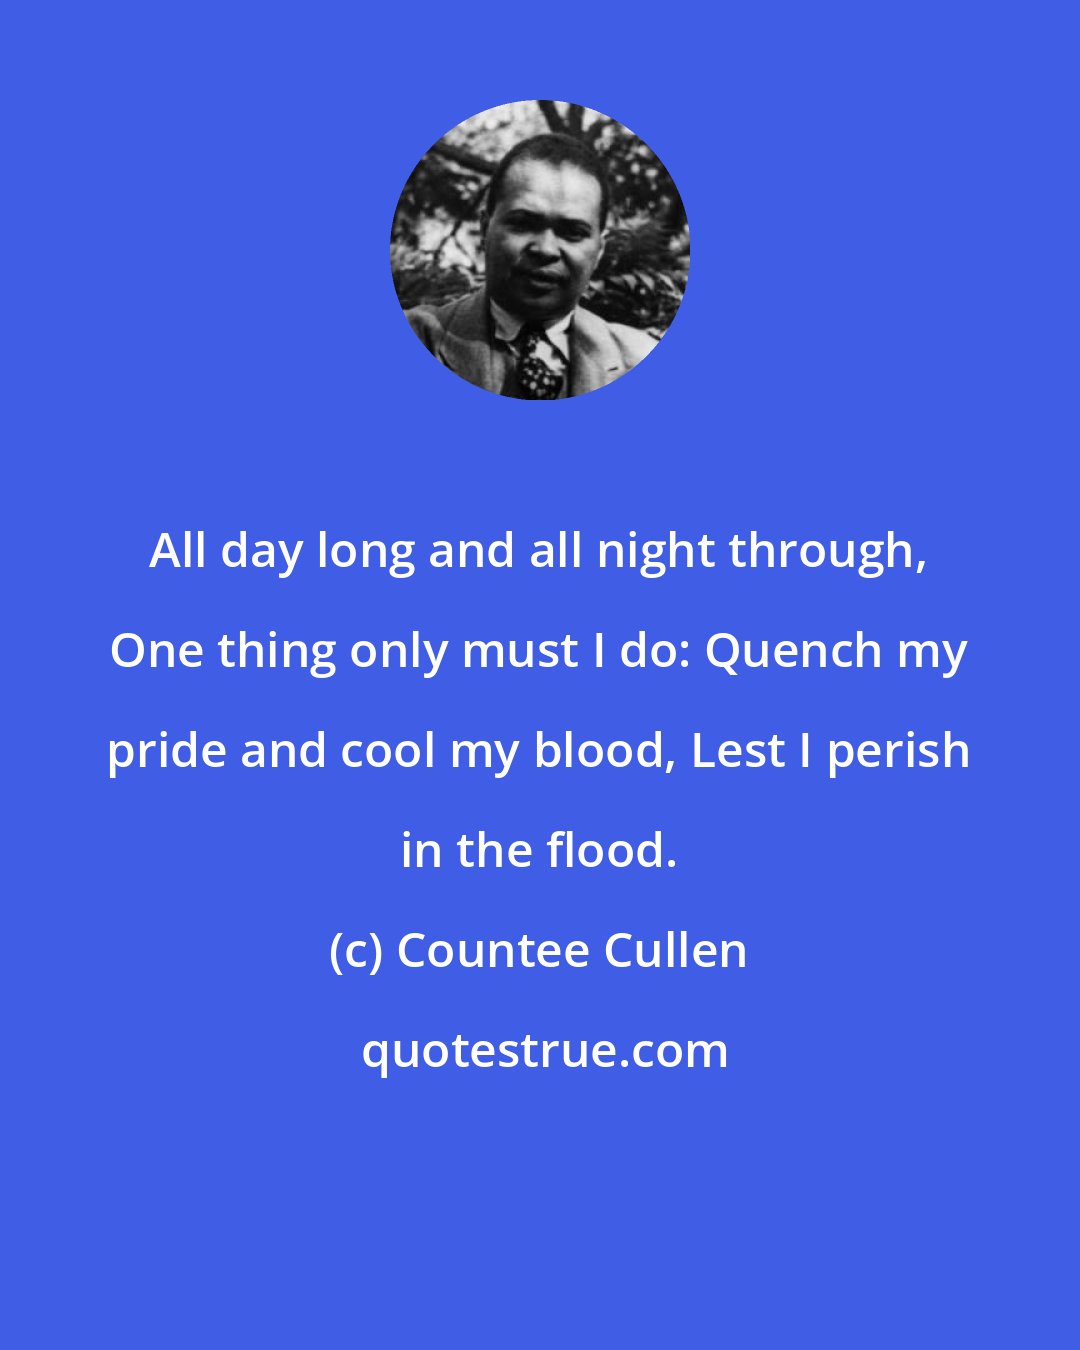 Countee Cullen: All day long and all night through, One thing only must I do: Quench my pride and cool my blood, Lest I perish in the flood.